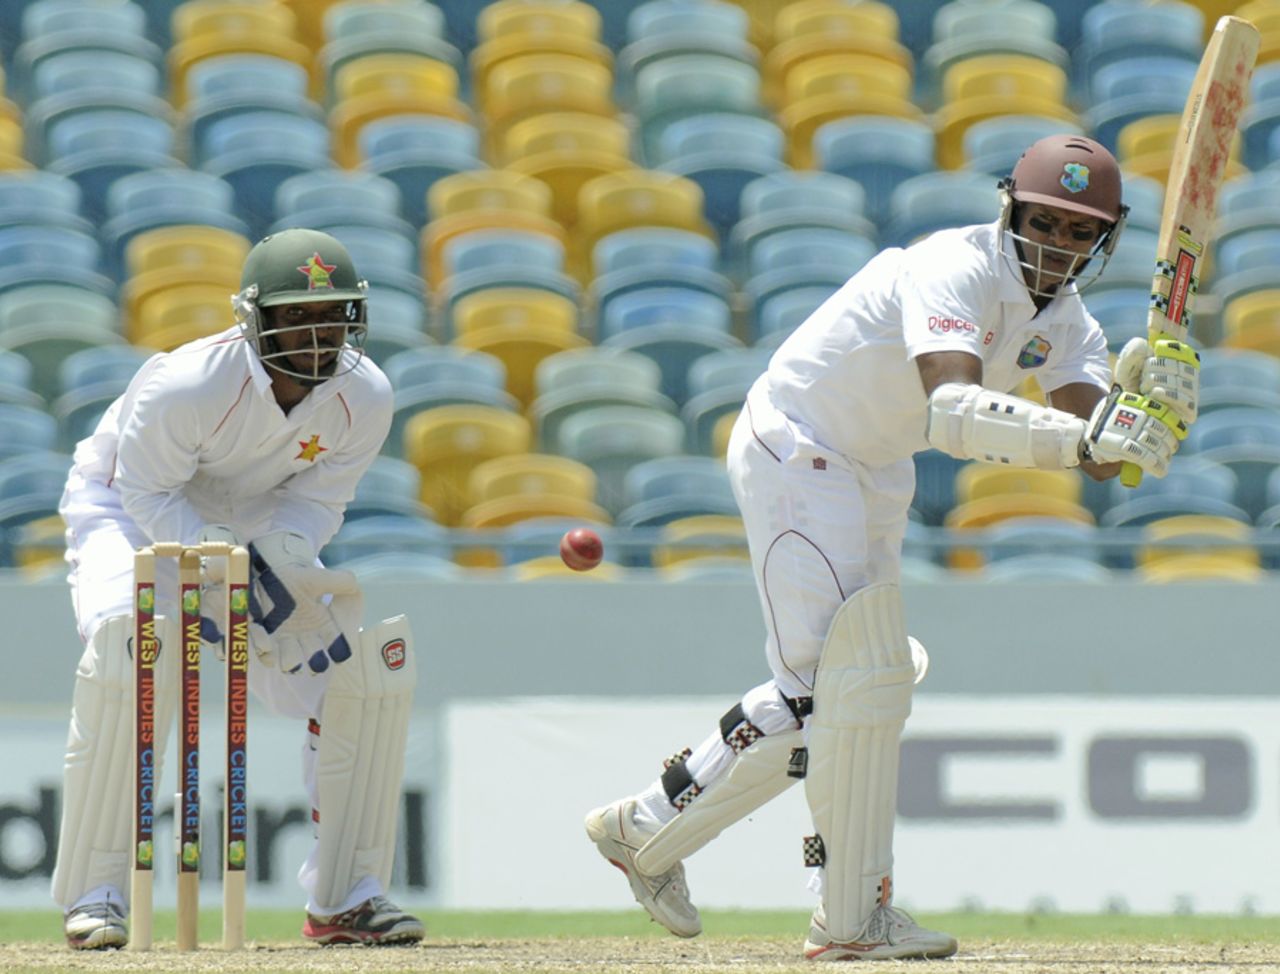 Shivnarine Chanderpaul turns one to leg, West Indies v Zimbabwe, 1st Test, Barbados, 2nd day, March 13, 2013